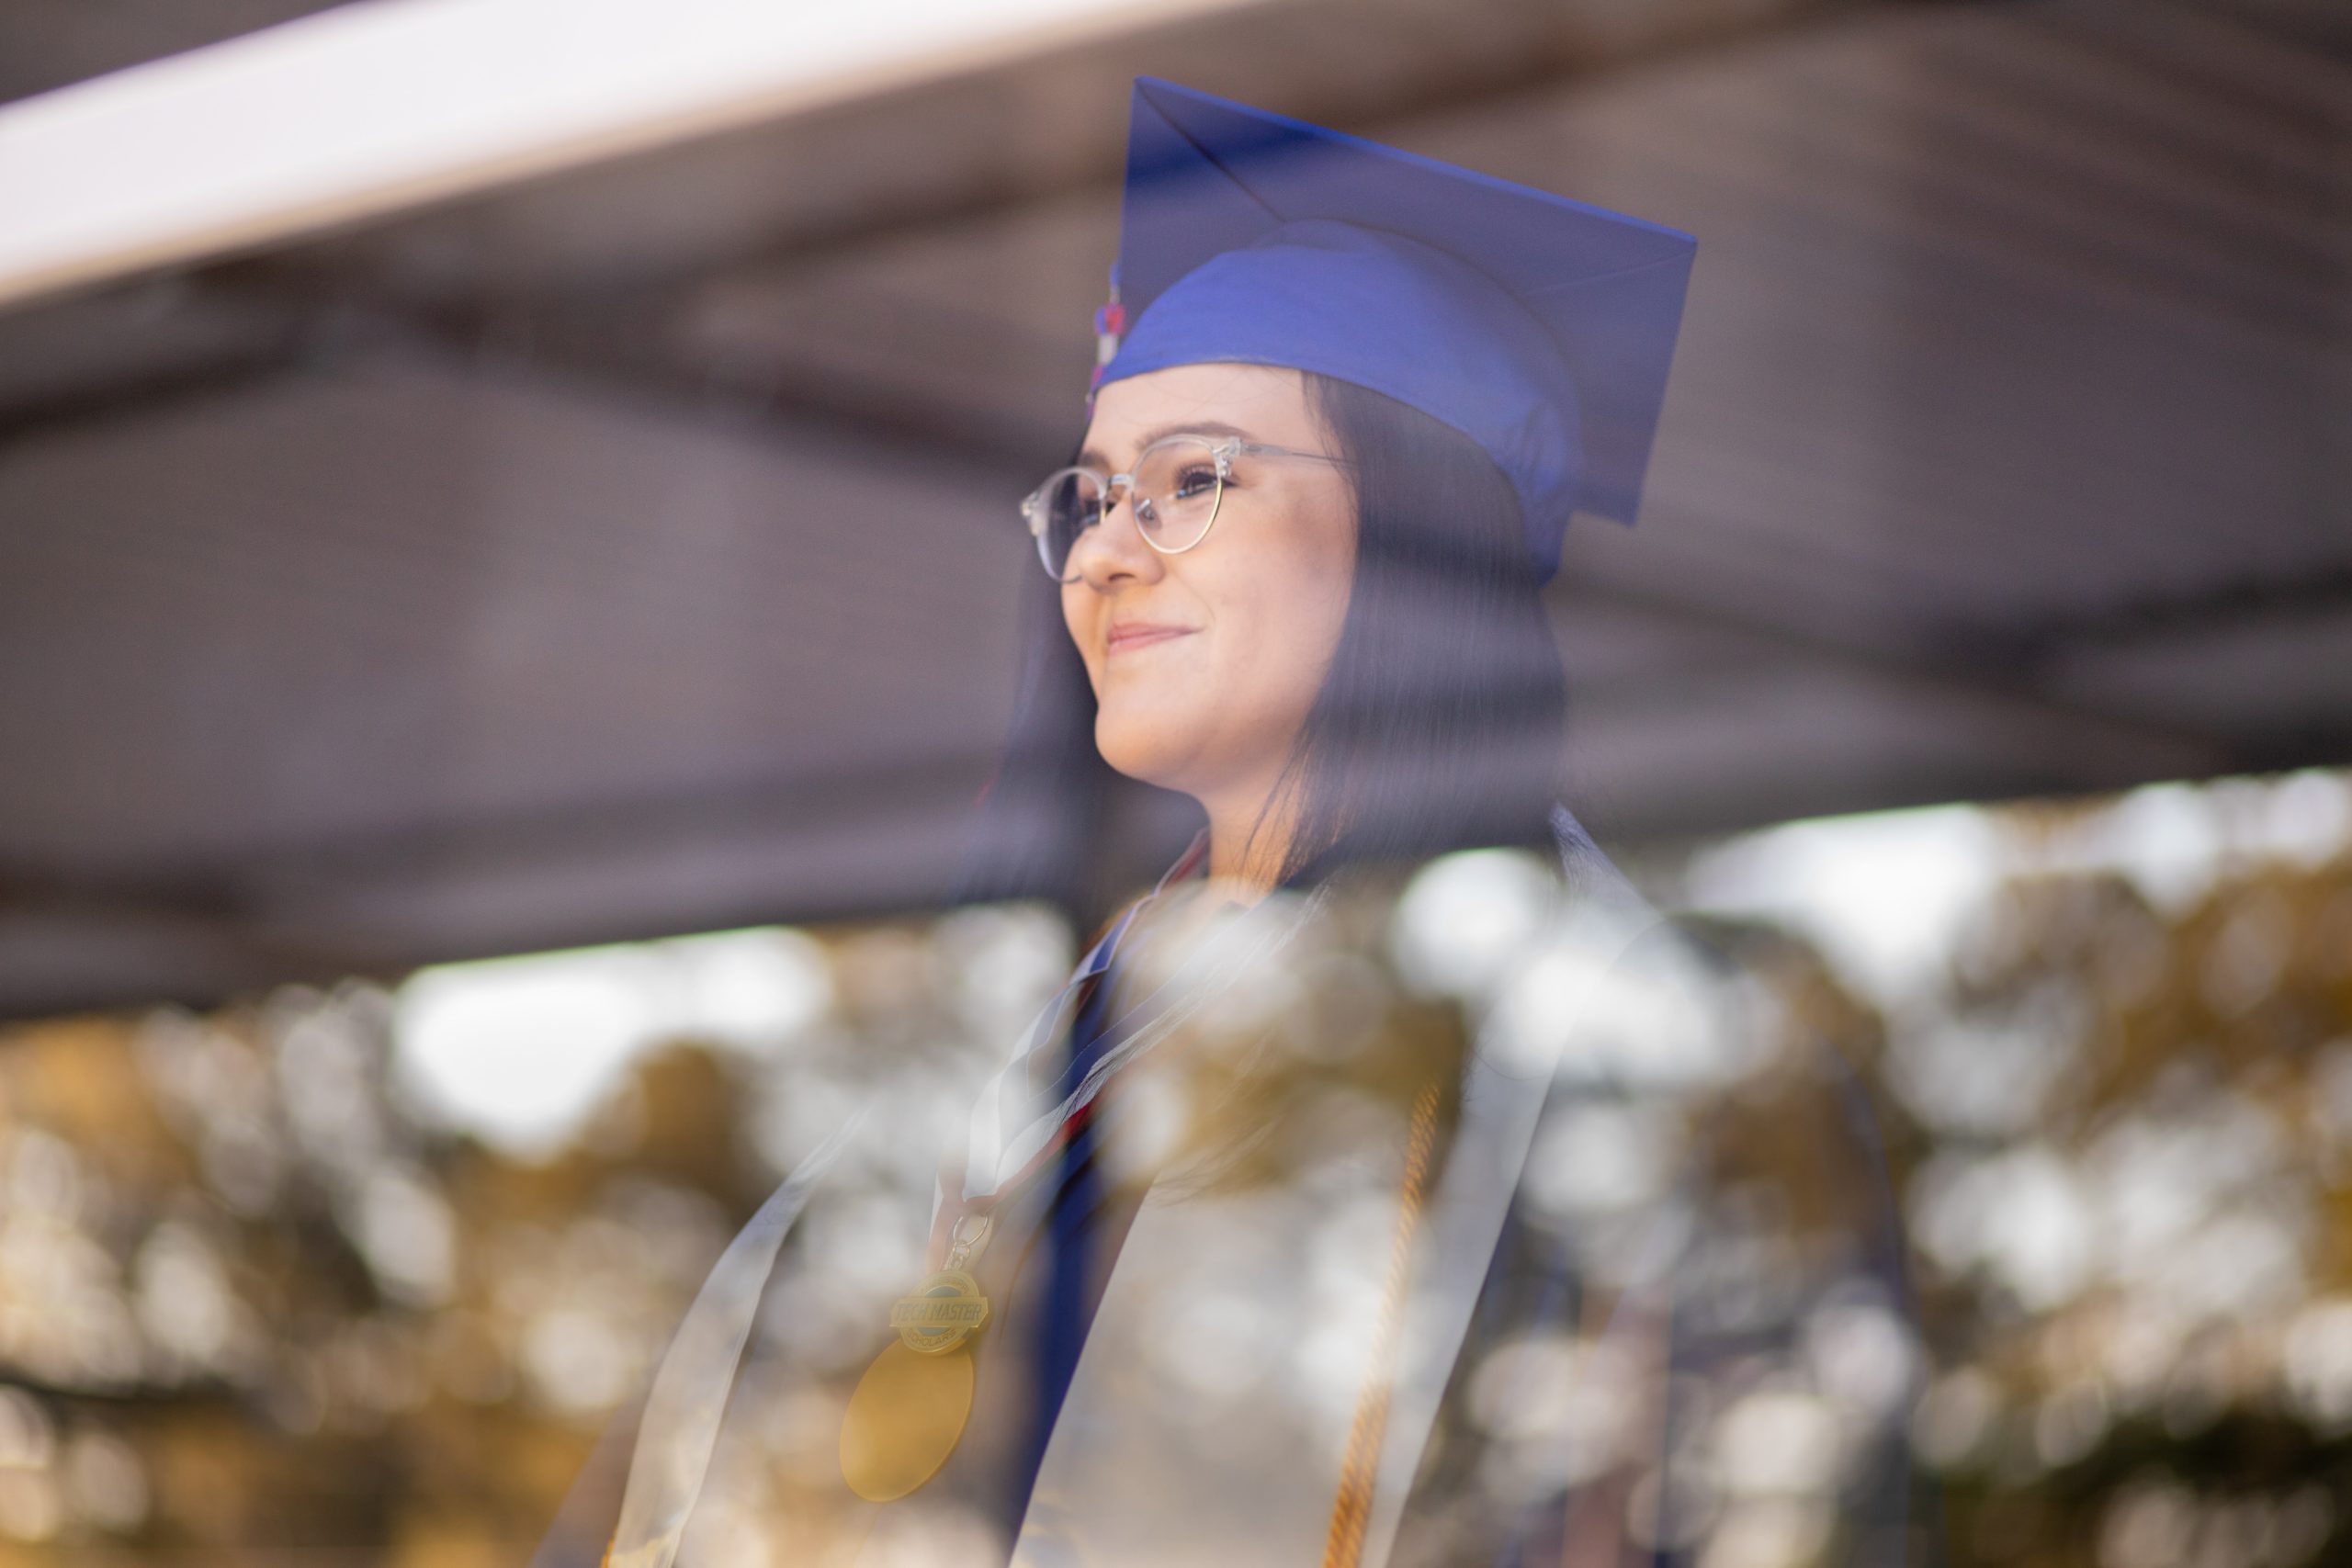 A woman in a graduation cap smiles and looks out the window